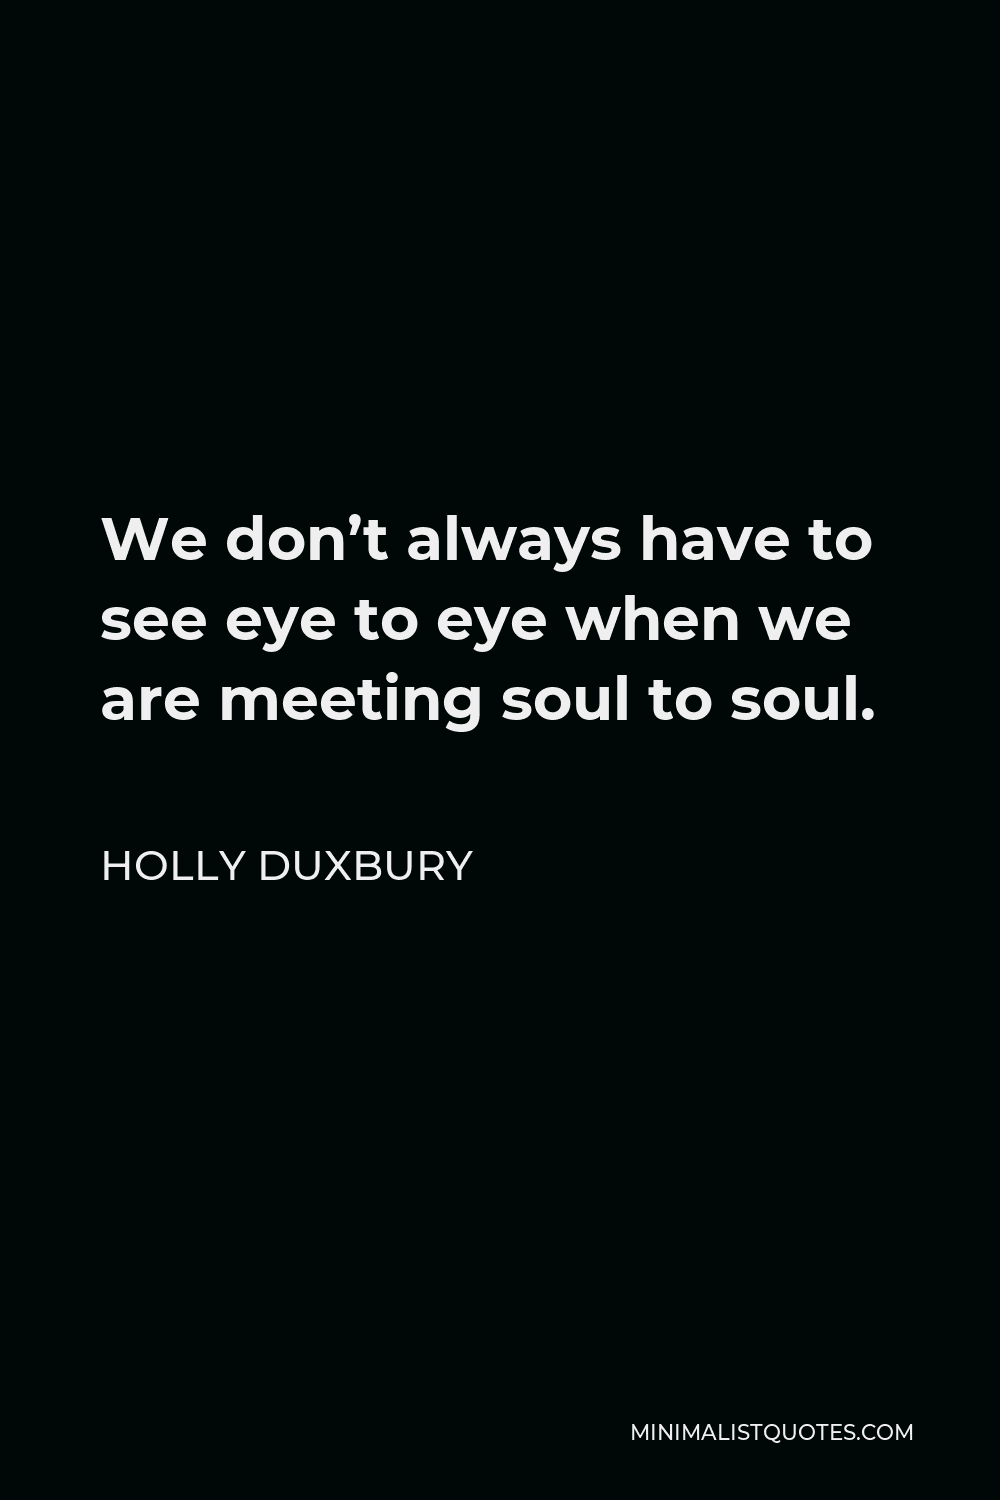 Holly Duxbury Quote - We don’t always have to see eye to eye when we are meeting soul to soul.